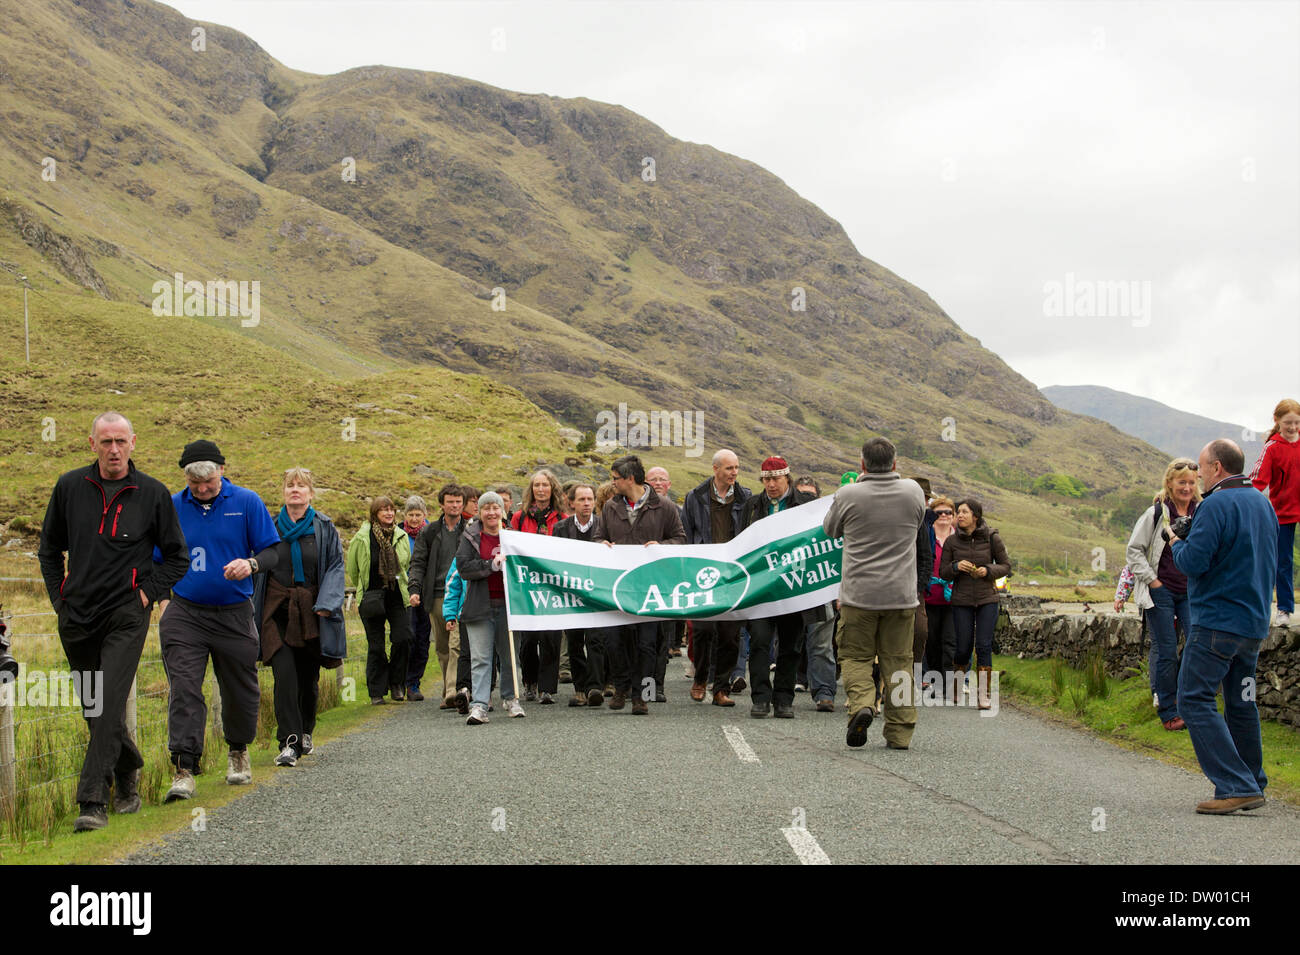 Walkers taking part in the annual Famine Walk from Doolough to Louisburgh in County Mayo, Ireland Stock Photo